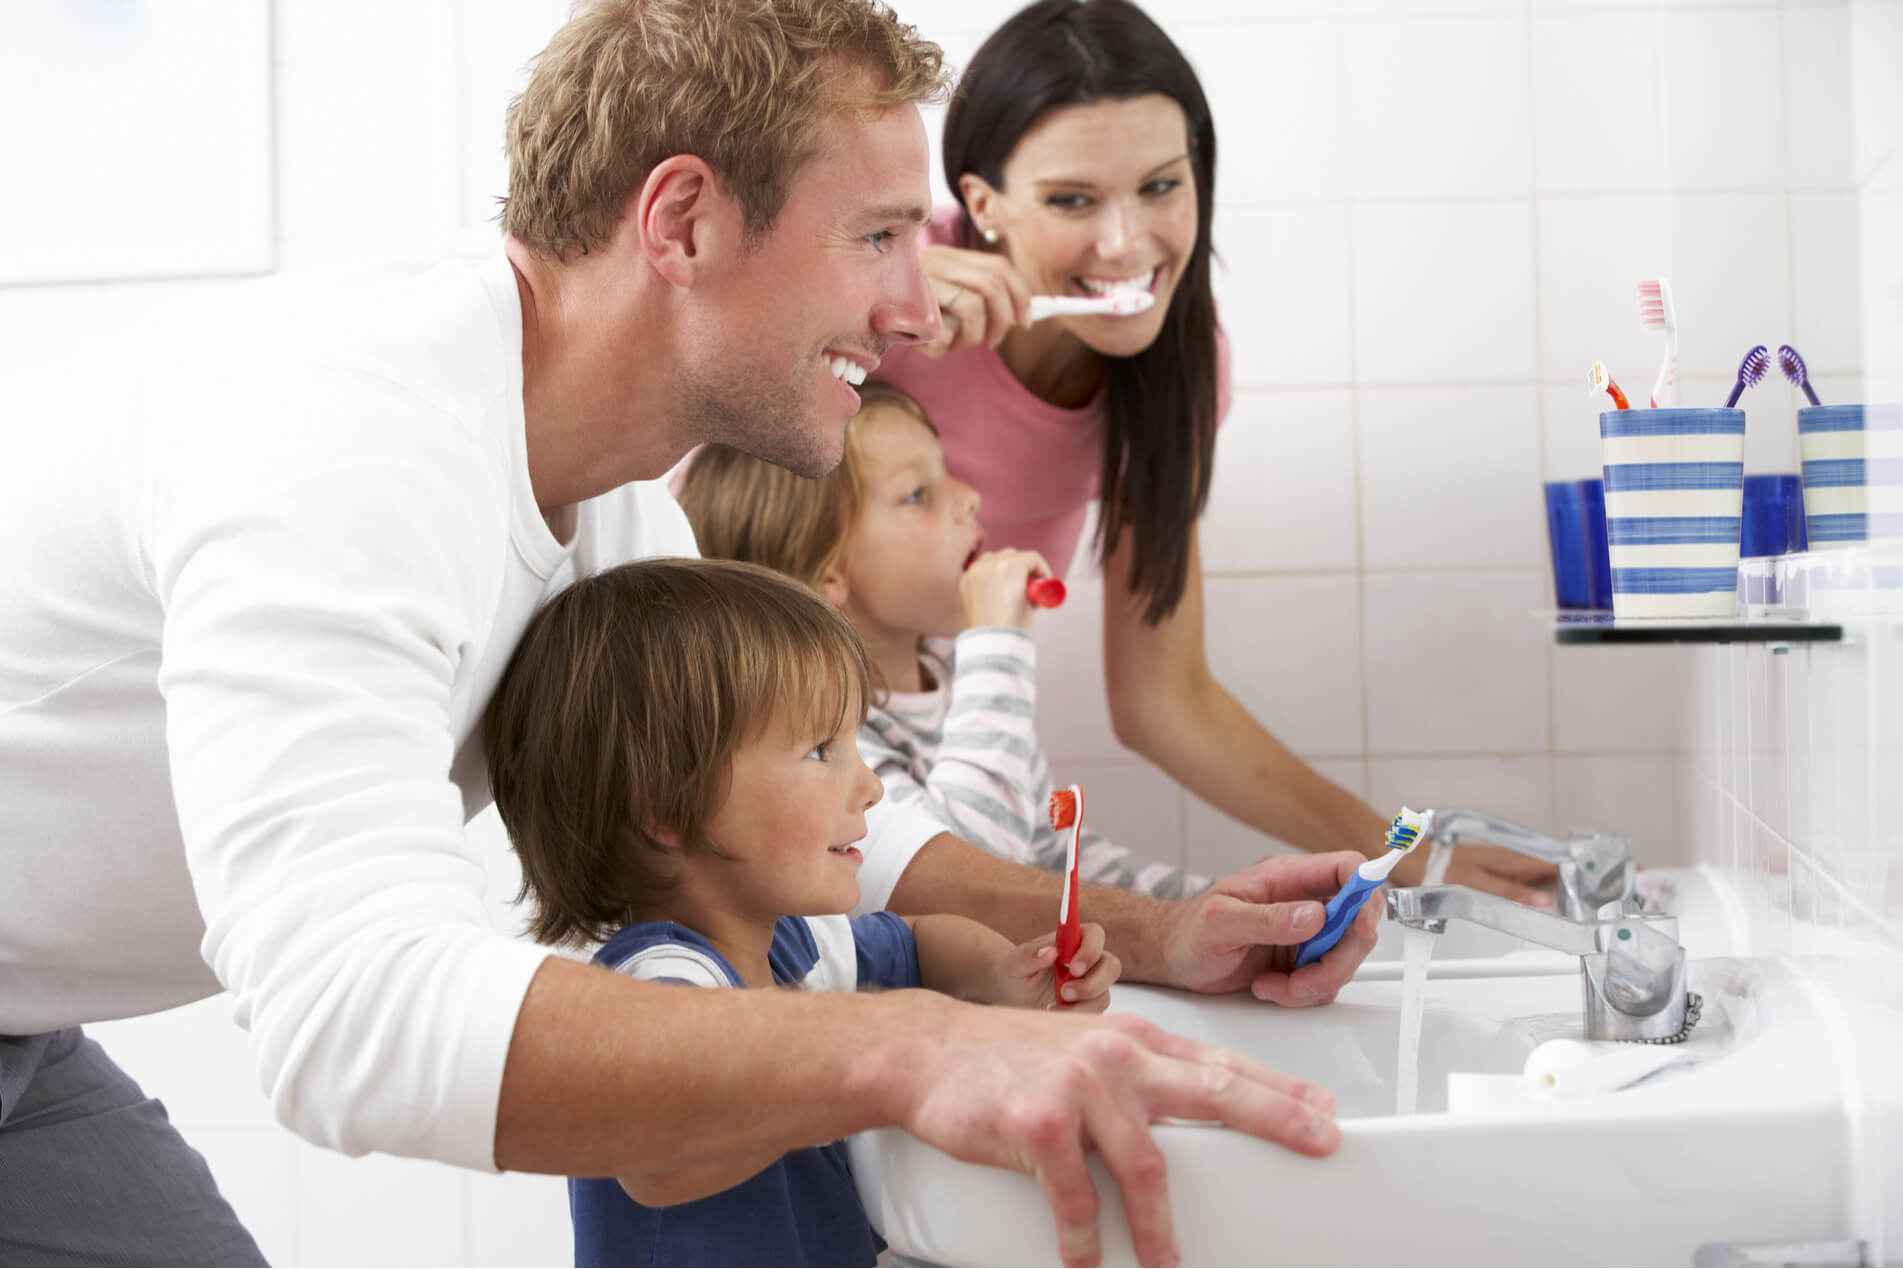 Top tips for brushing your teeth